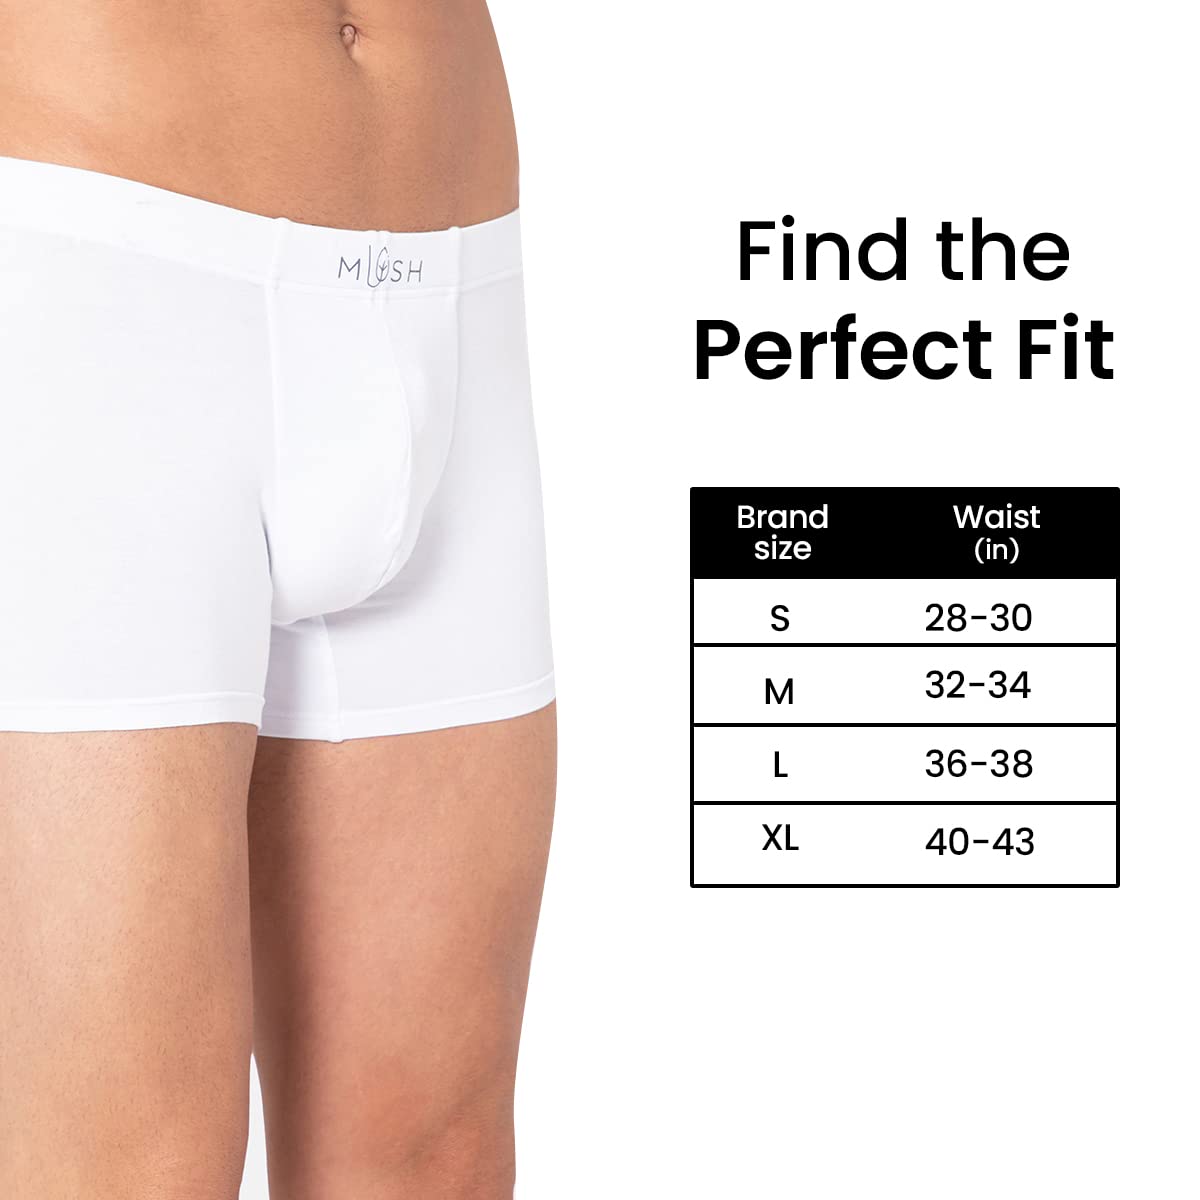 Mush Ultra Soft, Breathable, Feather Light Men's Bamboo Trunk || Naturally Anti-Odor and Anti-Microbial Bamboo Innerwear Pack of 2